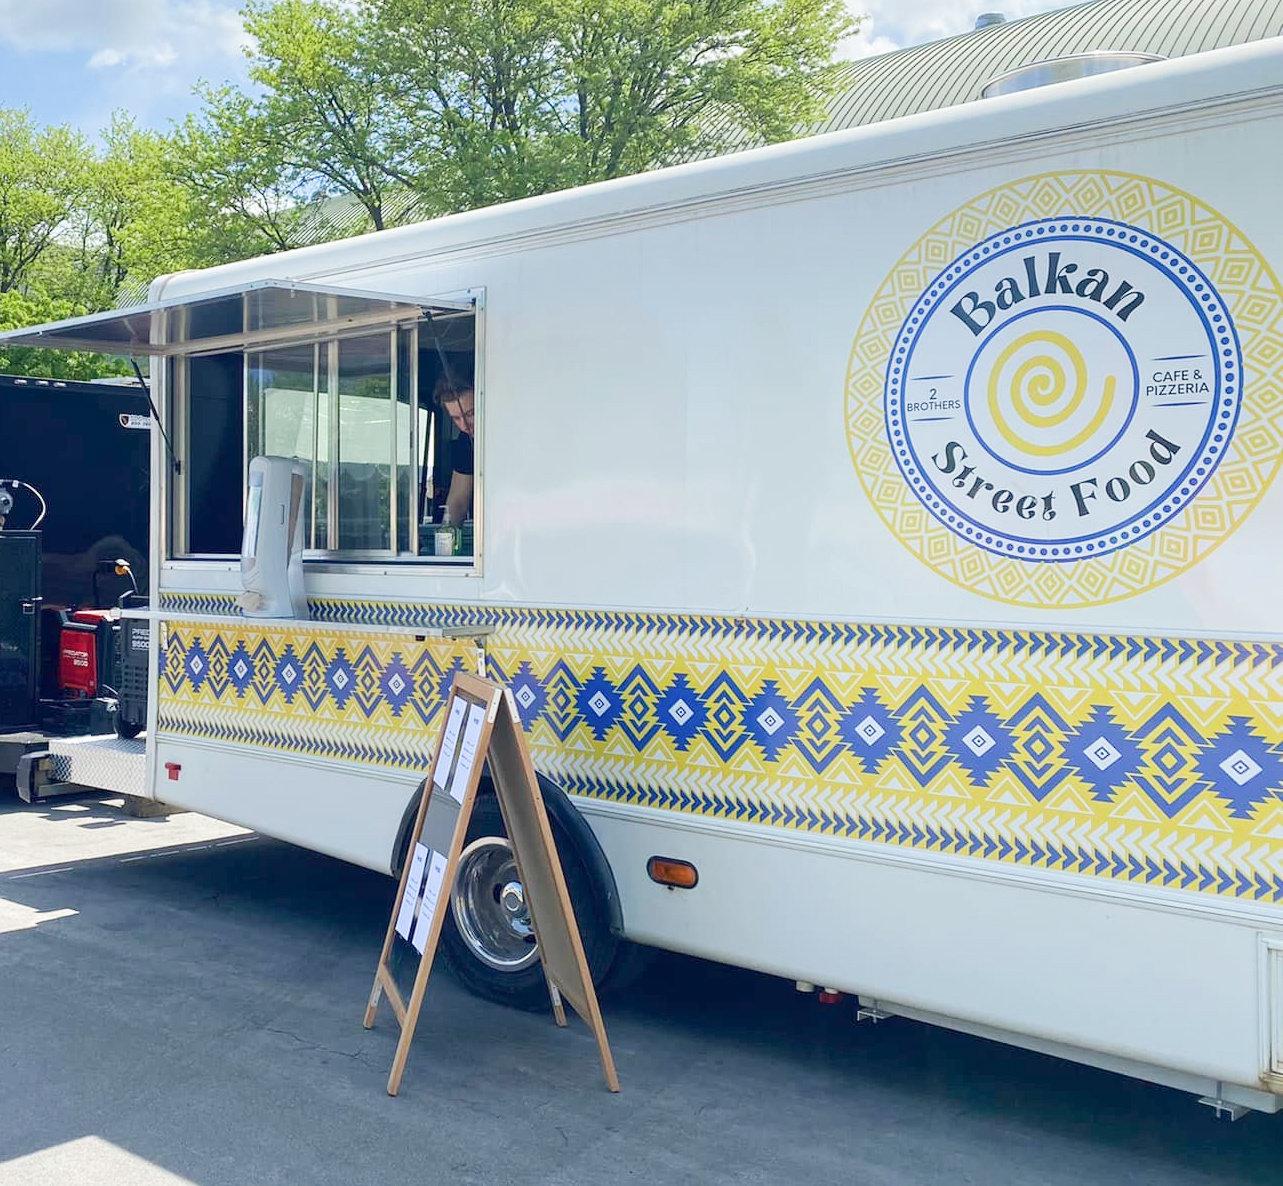 2 Brothers Cafe and Pizzeria in Utica's new food truck, Balkan Street Food, will be serving traditional Balkan-area dishes to hungry fairgoers at the New York State Fair.